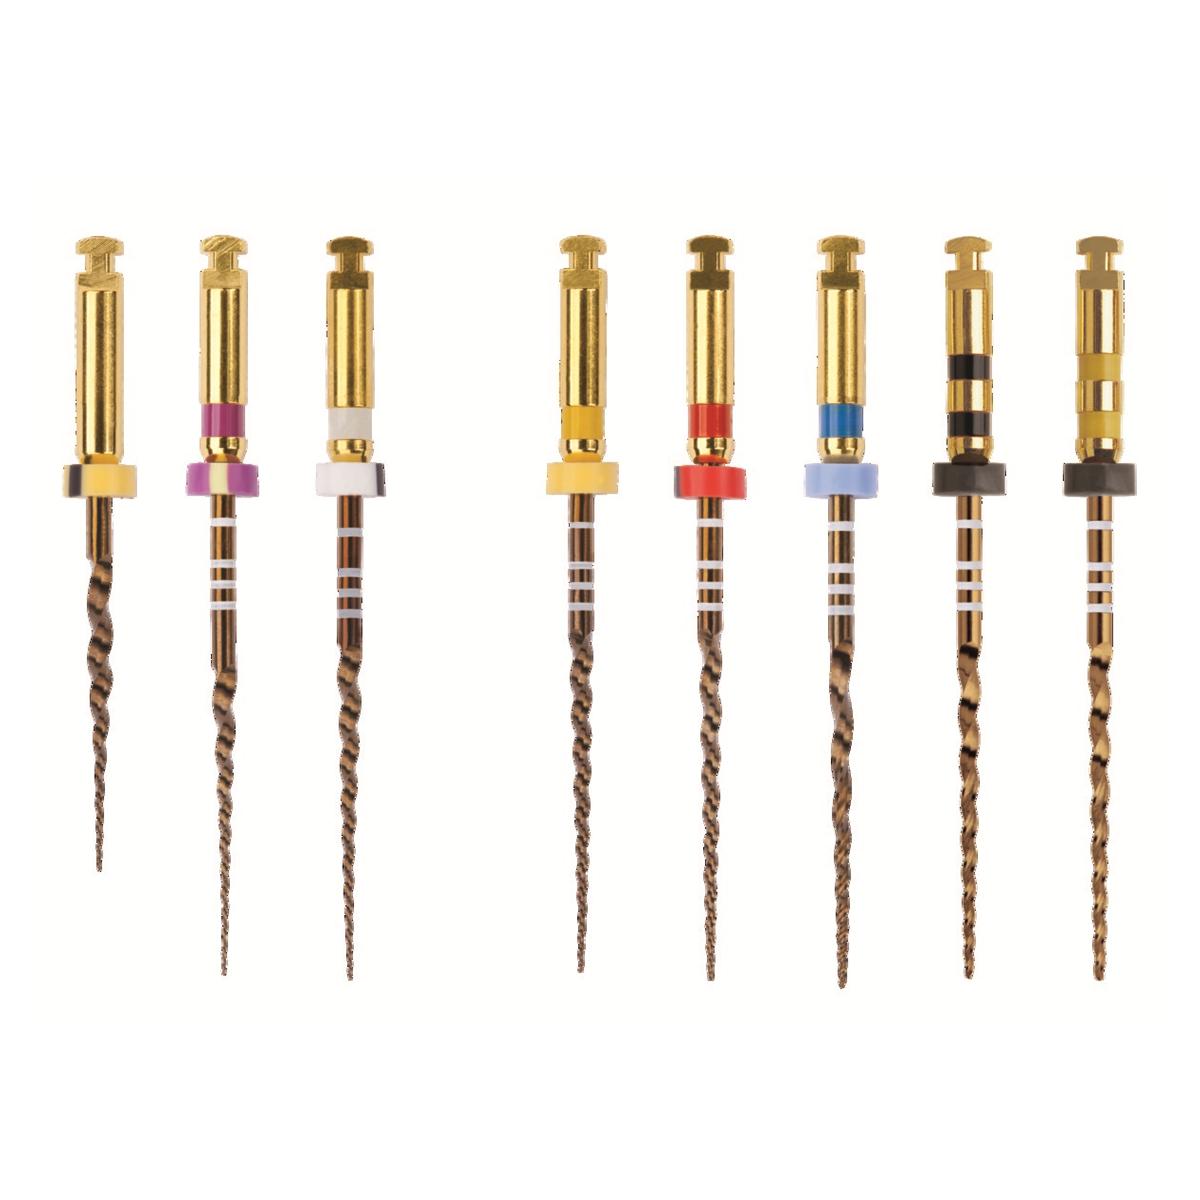 PRO-TAPER GOLD STERILES 31MM S1 (6) MAILLEFER